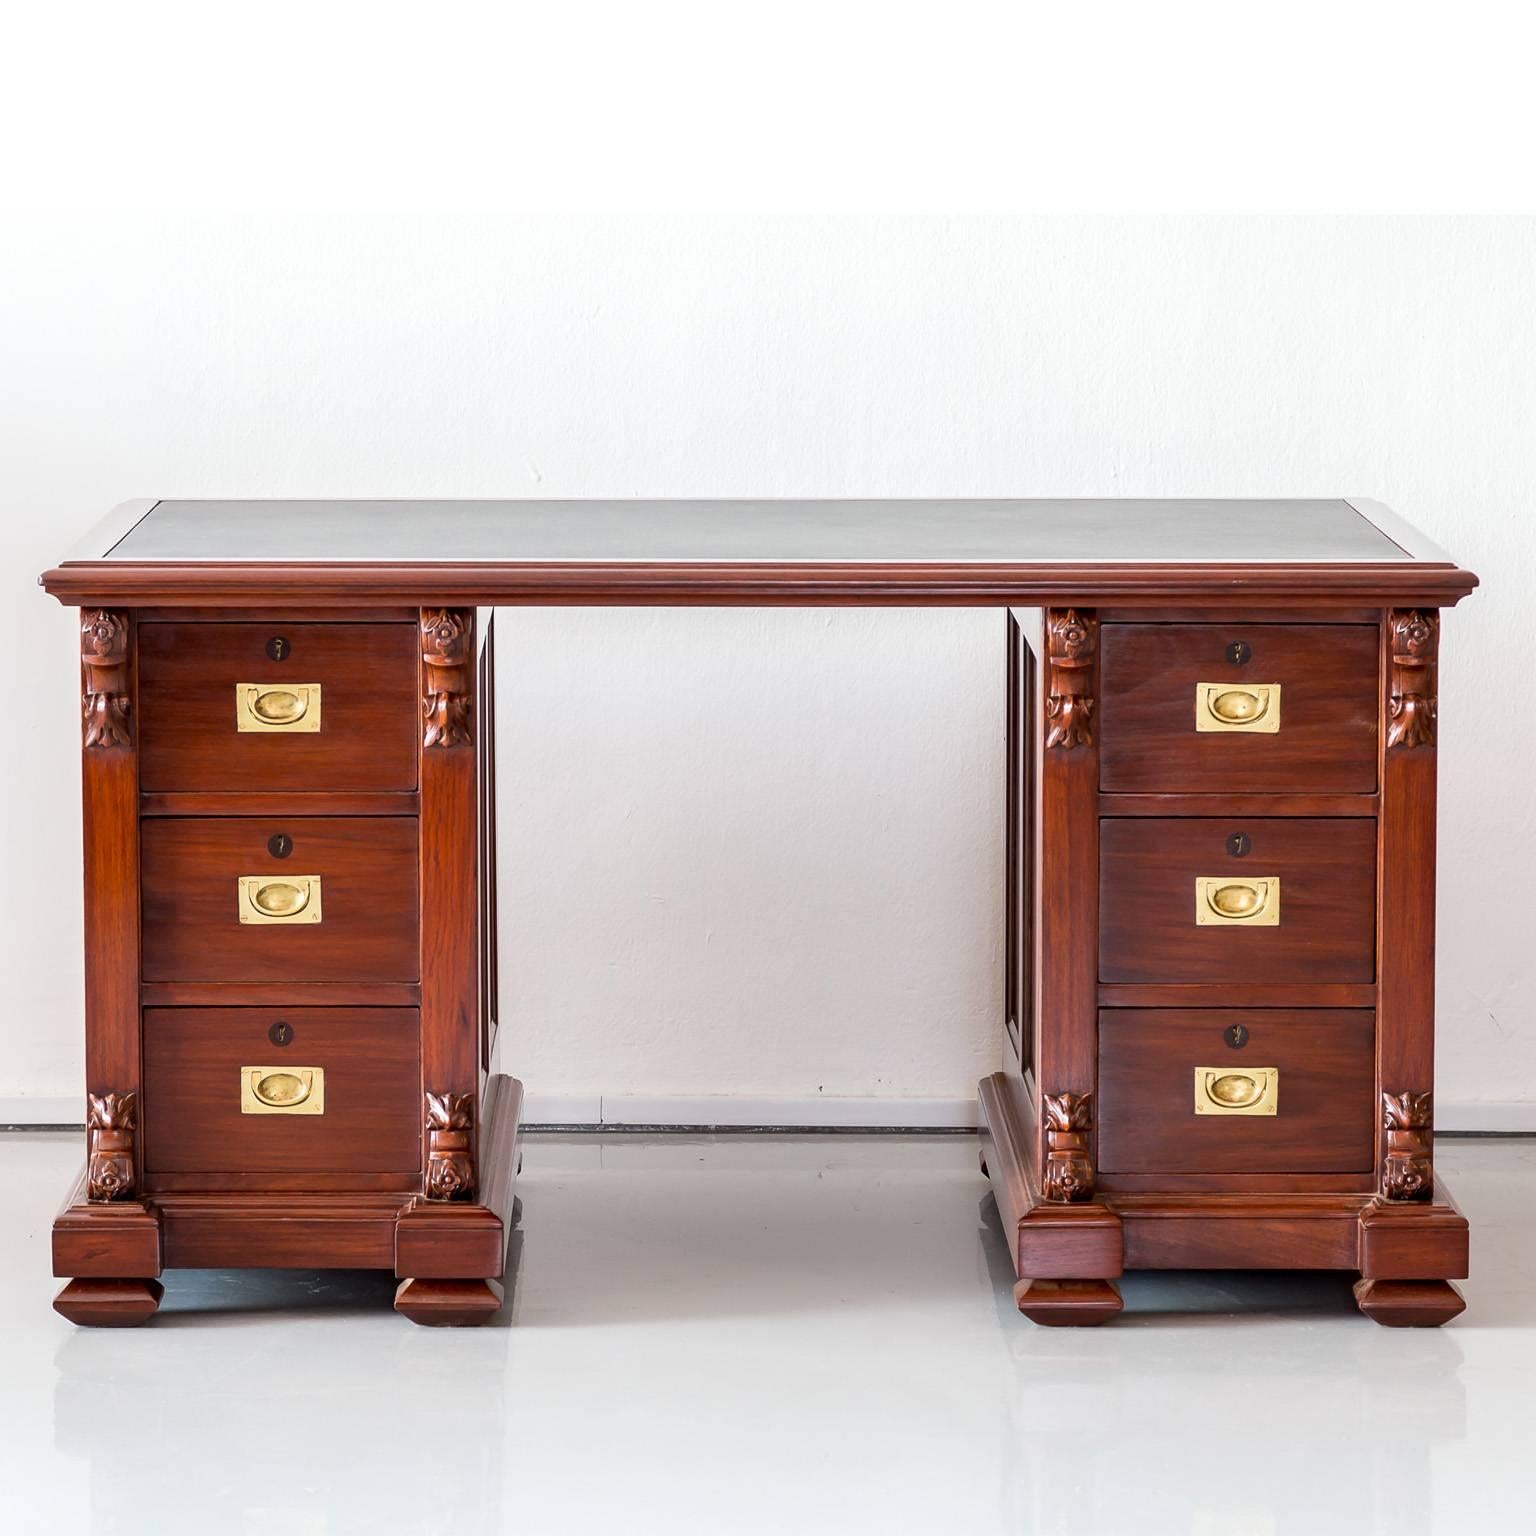 A nice, British Colonial twin pedestal desk in mahogany with a large overhanging top 
above a central kneehole. The top with a new black leather insert. Each pedestal has 
three drawers that are flanked by a decorative carved column. The drawers